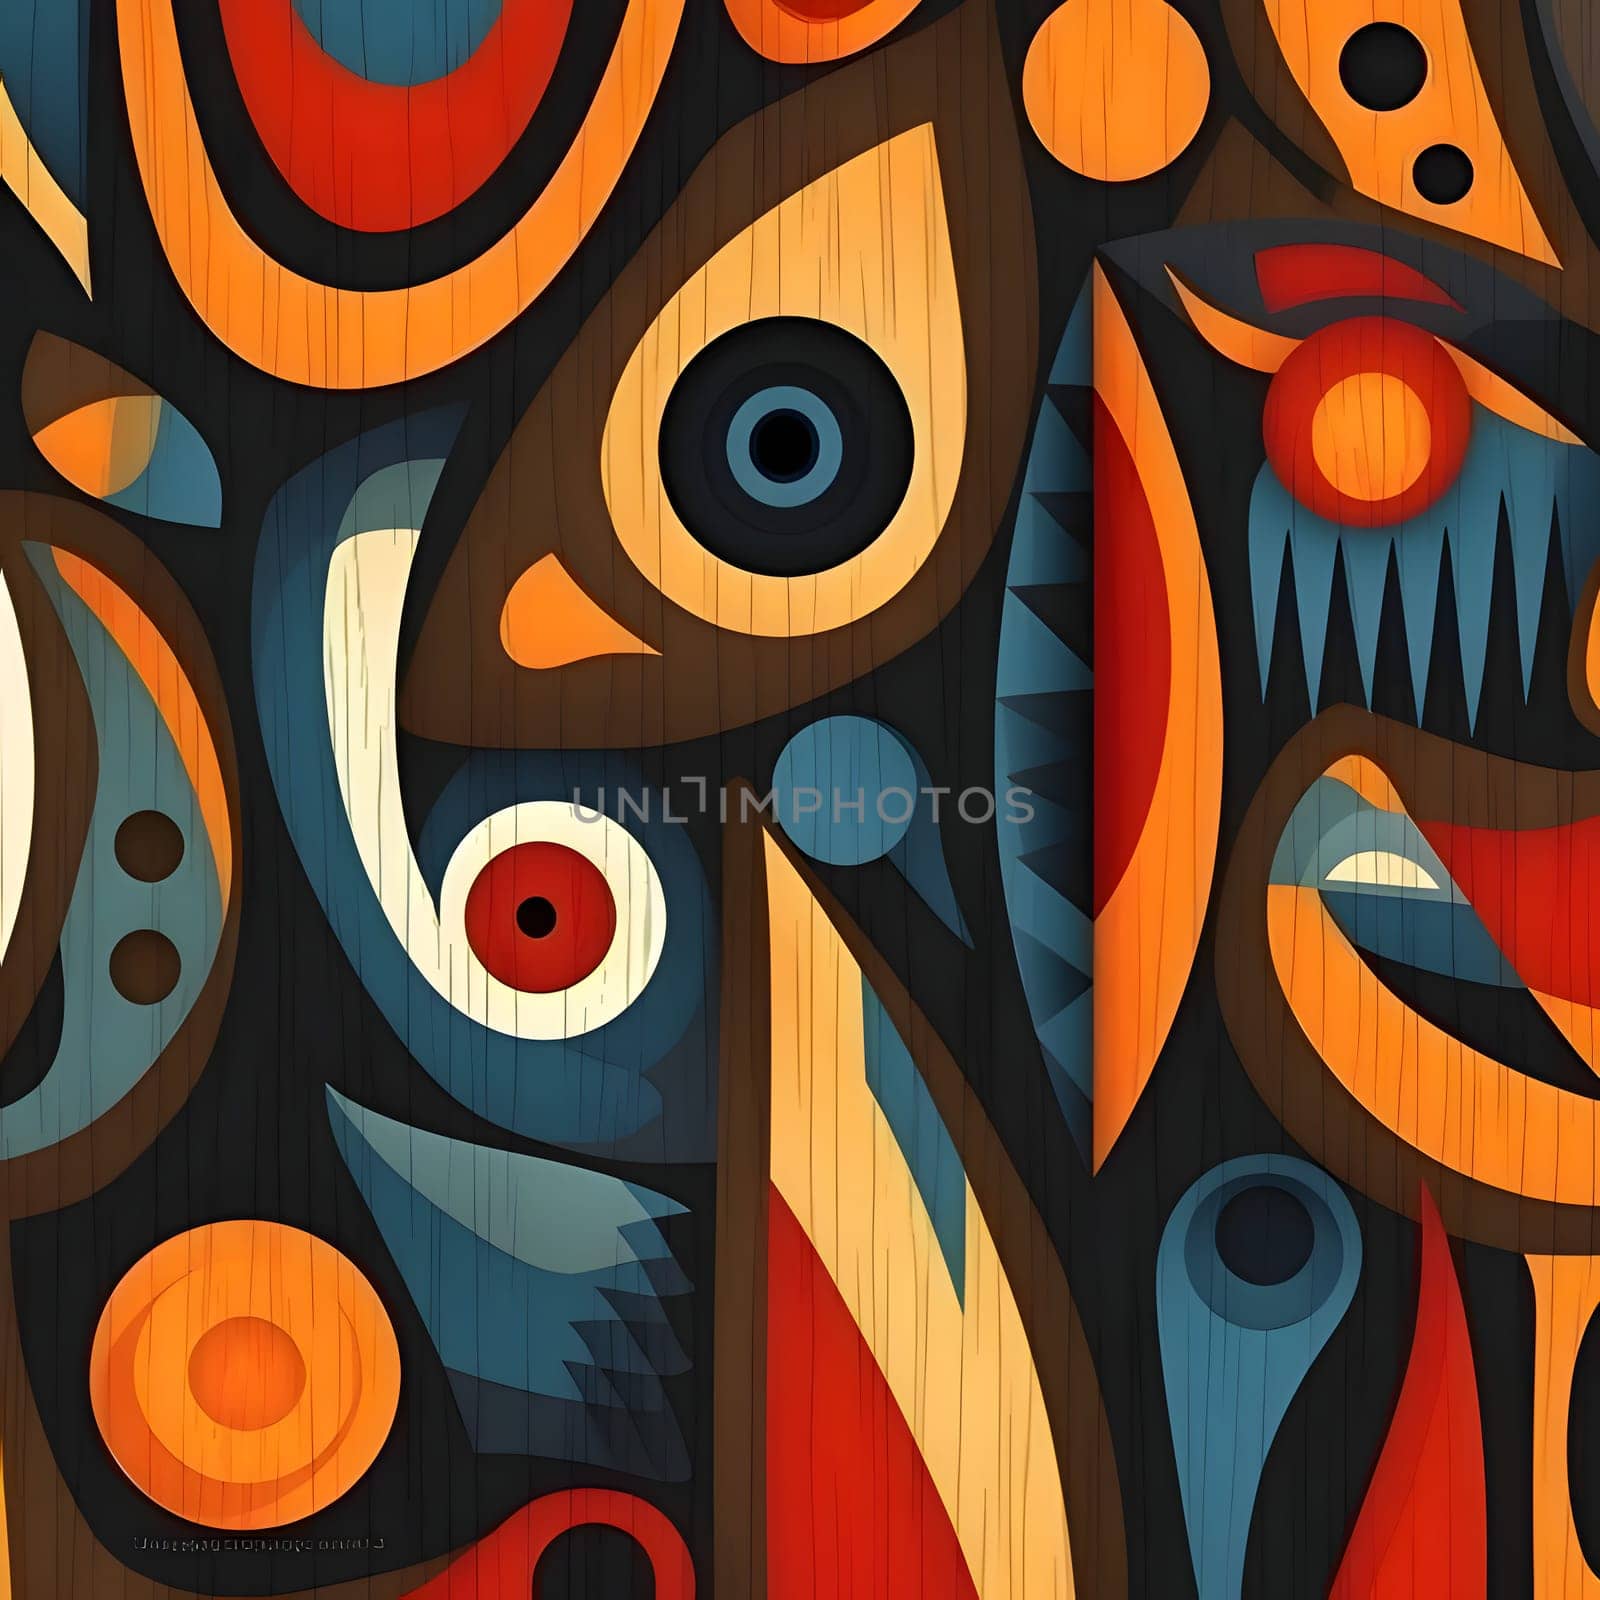 Patterns and banners backgrounds: Seamless pattern with abstract shapes. Vector illustration. Eps 10.